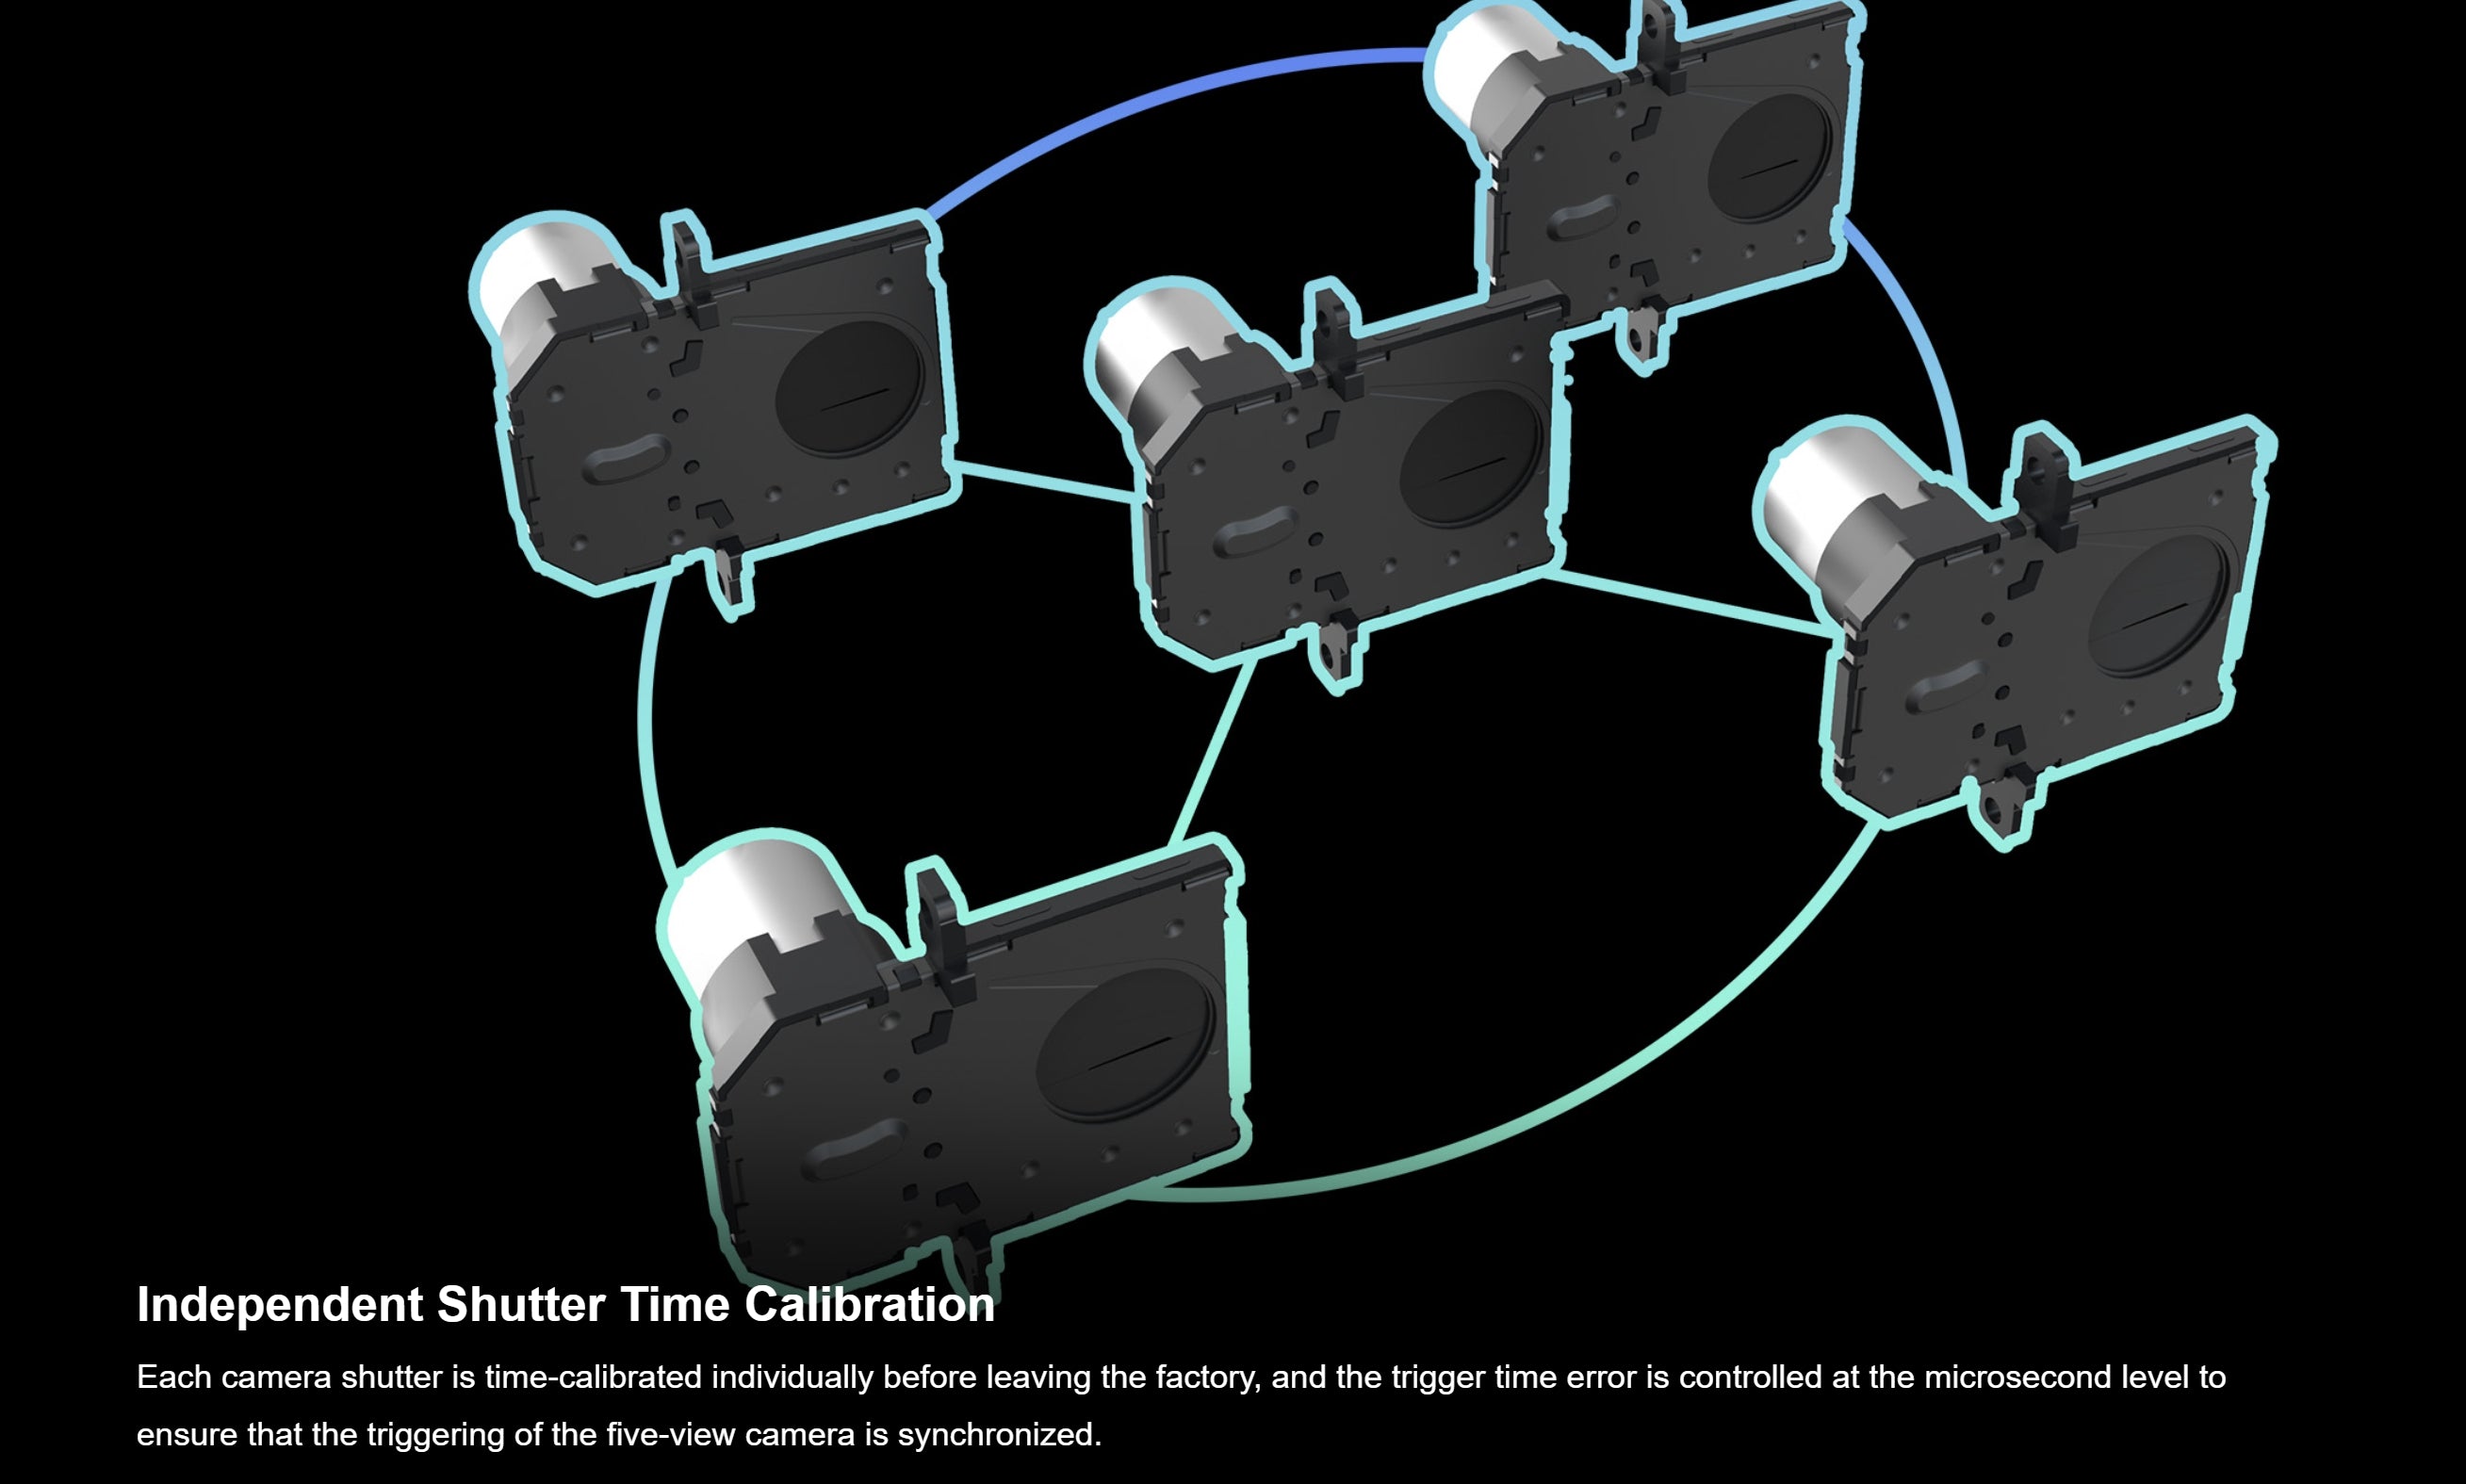 SHARE 303S Pro V2, Calibrated cameras ensure precise synchronization for accurate 3D mapping.